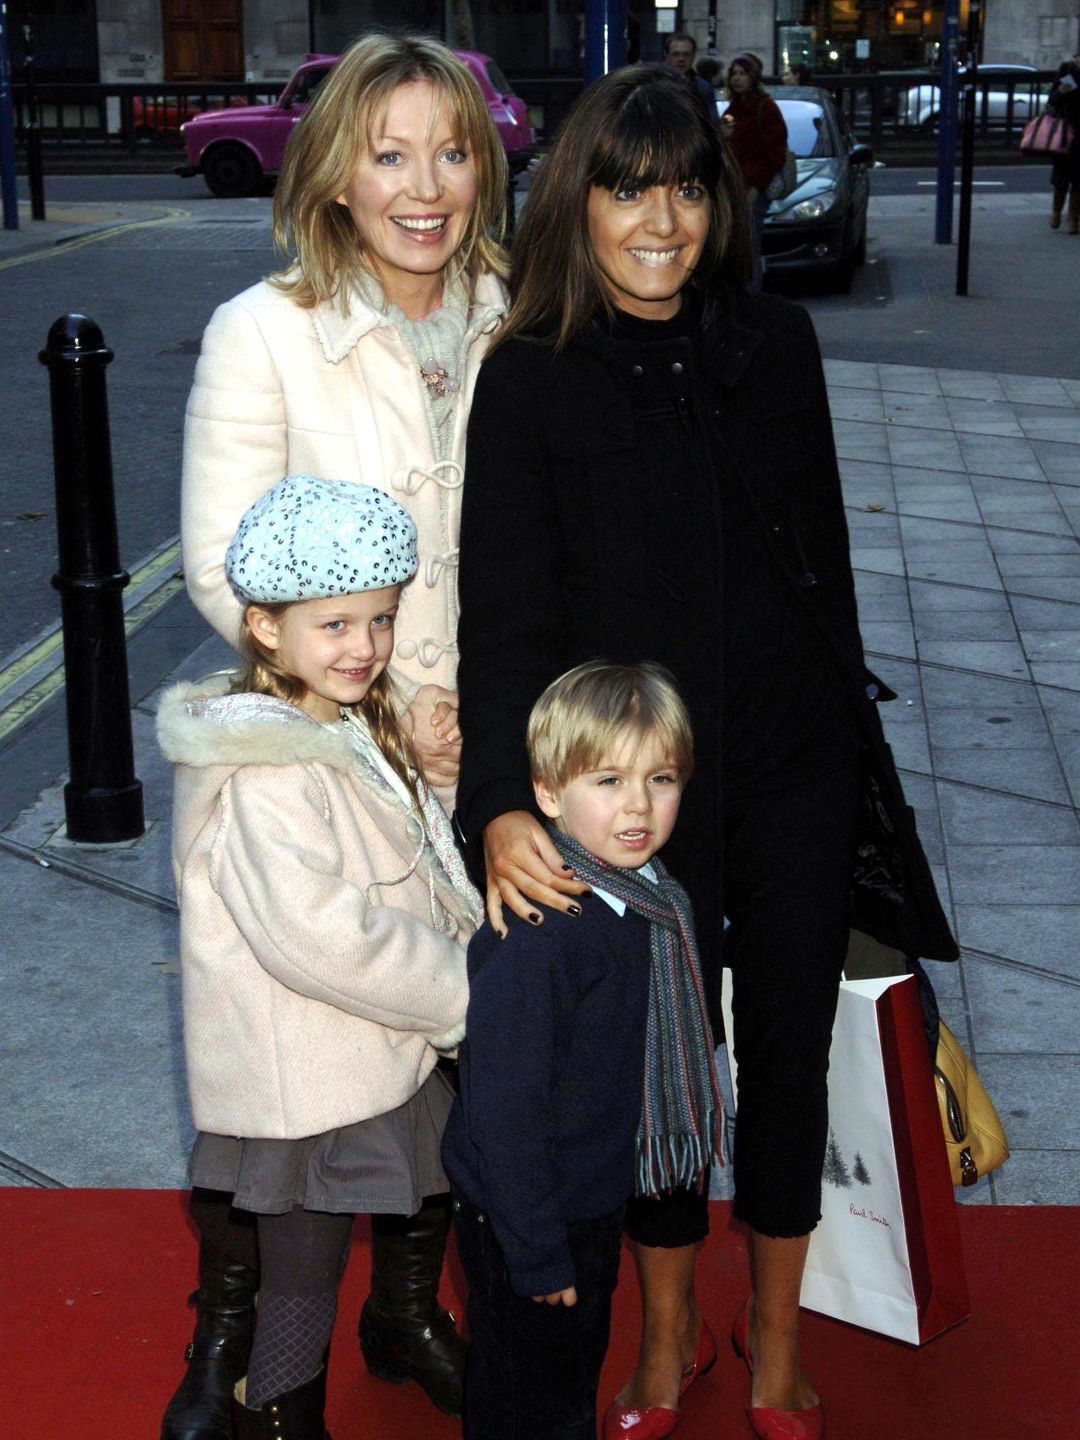 Kirsty Youngwith daughter Freya and Claudia Winkleman with son Jake arrive for the VIP press launch of The Snowman, at the Peacock Theatre in central London.